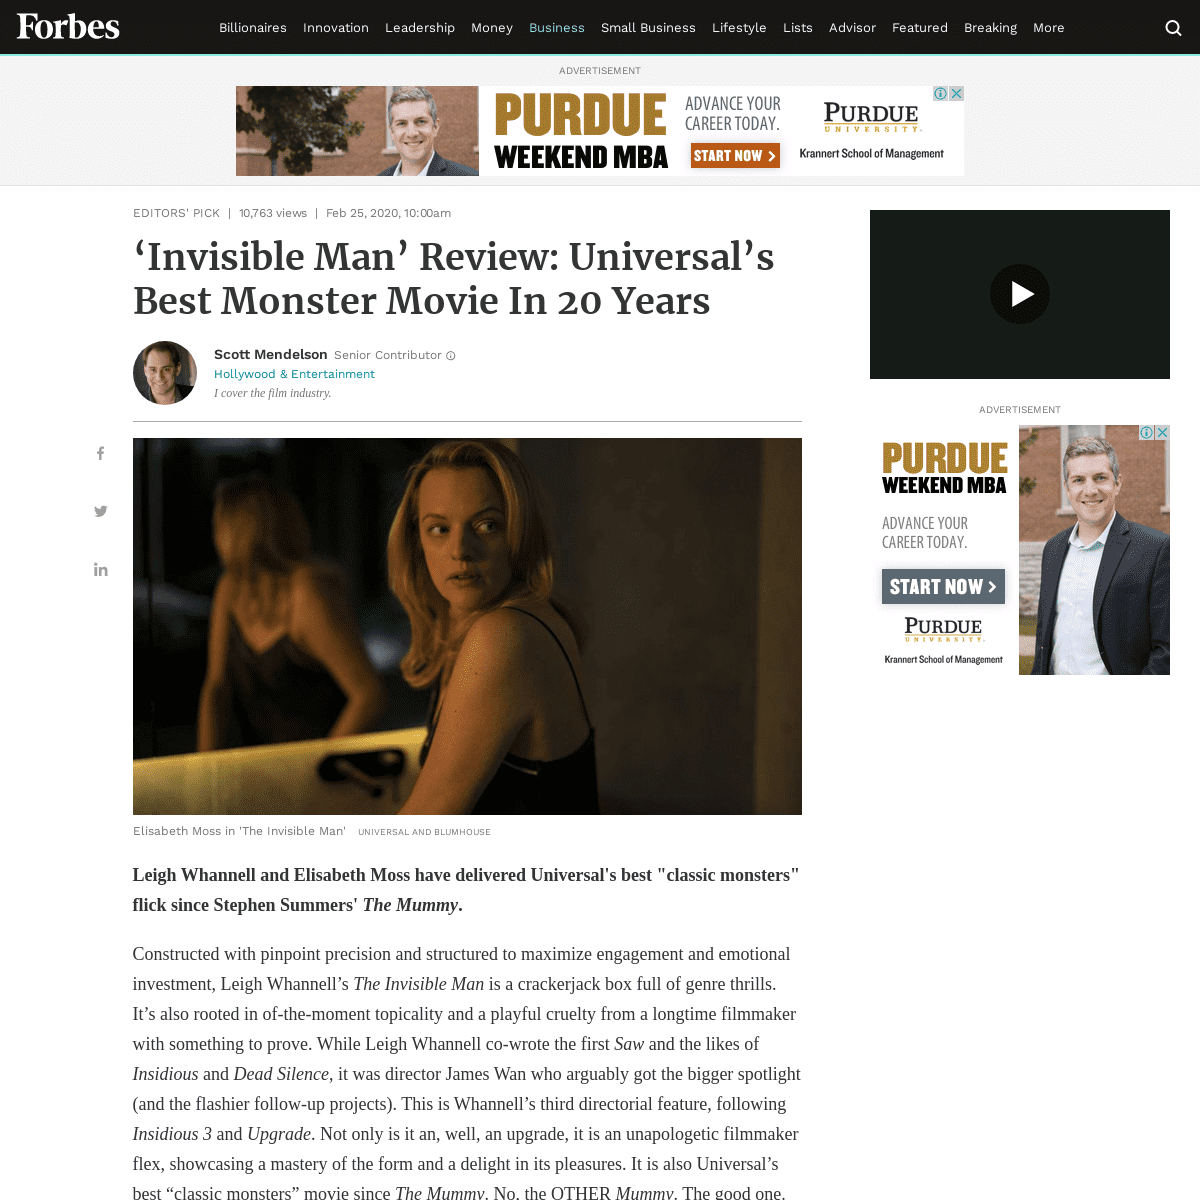 A complete backup of www.forbes.com/sites/scottmendelson/2020/02/25/invisible-man-review-best-universal-monster-movie-since-mumm